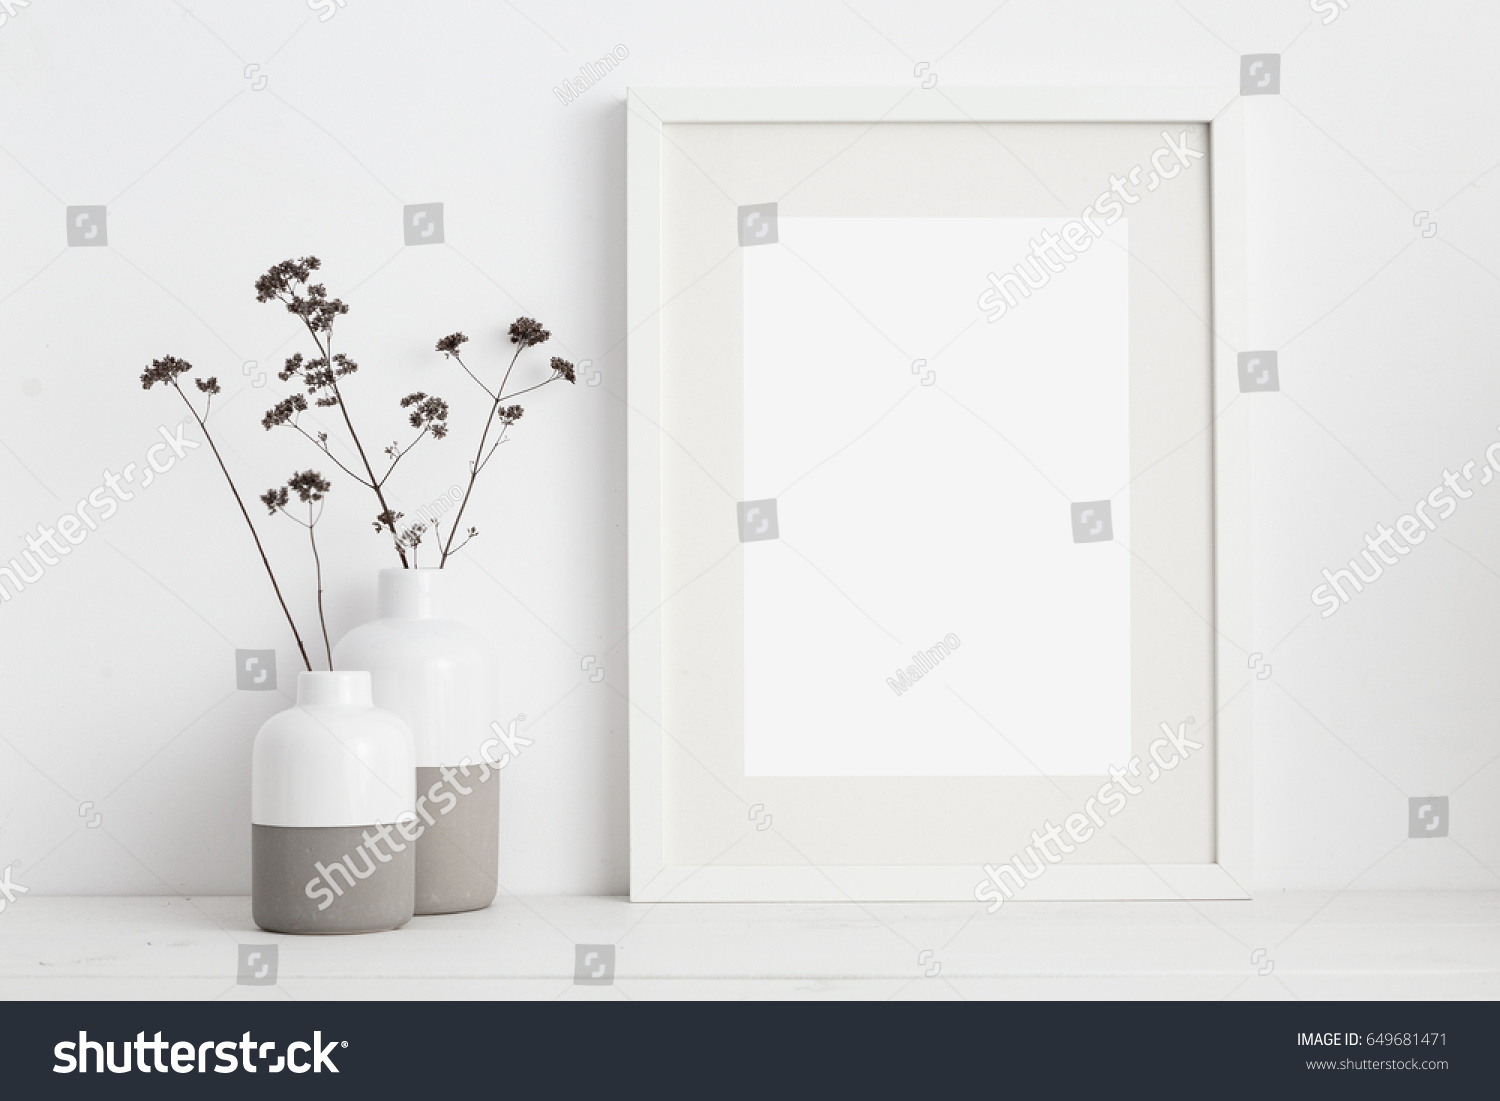 Mock up white frame and dry twigs in vase on book shelf or desk. White colors.
